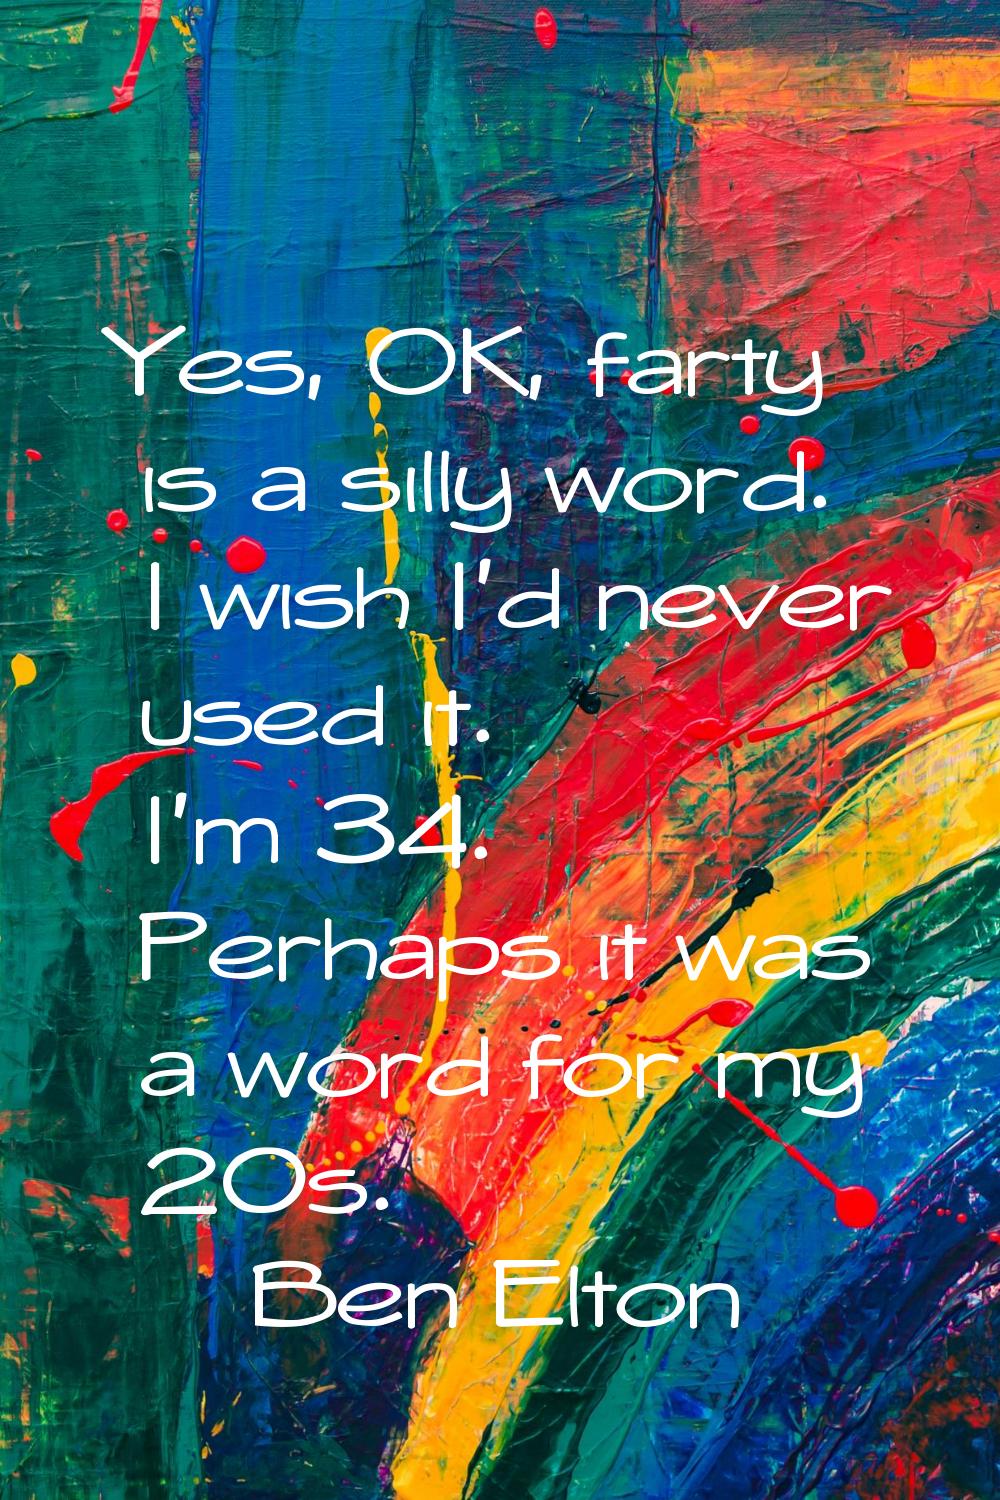 Yes, OK, farty is a silly word. I wish I'd never used it. I'm 34. Perhaps it was a word for my 20s.